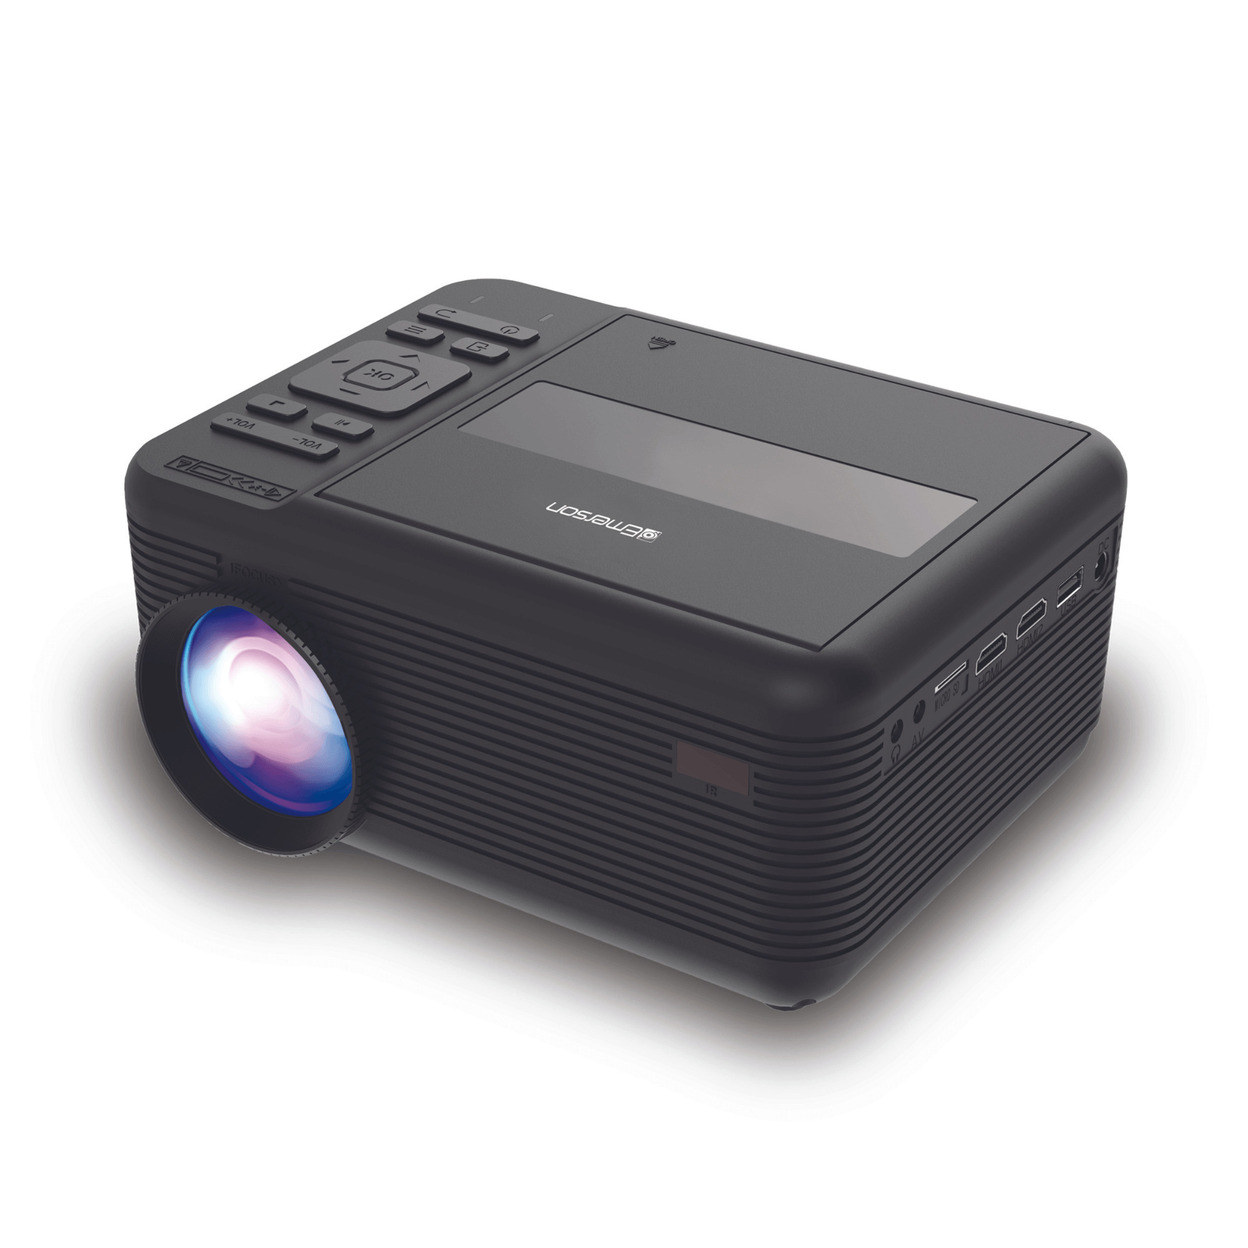 Emerson 150 Home Theater LCD Projector Combo With Built-In DVD Player